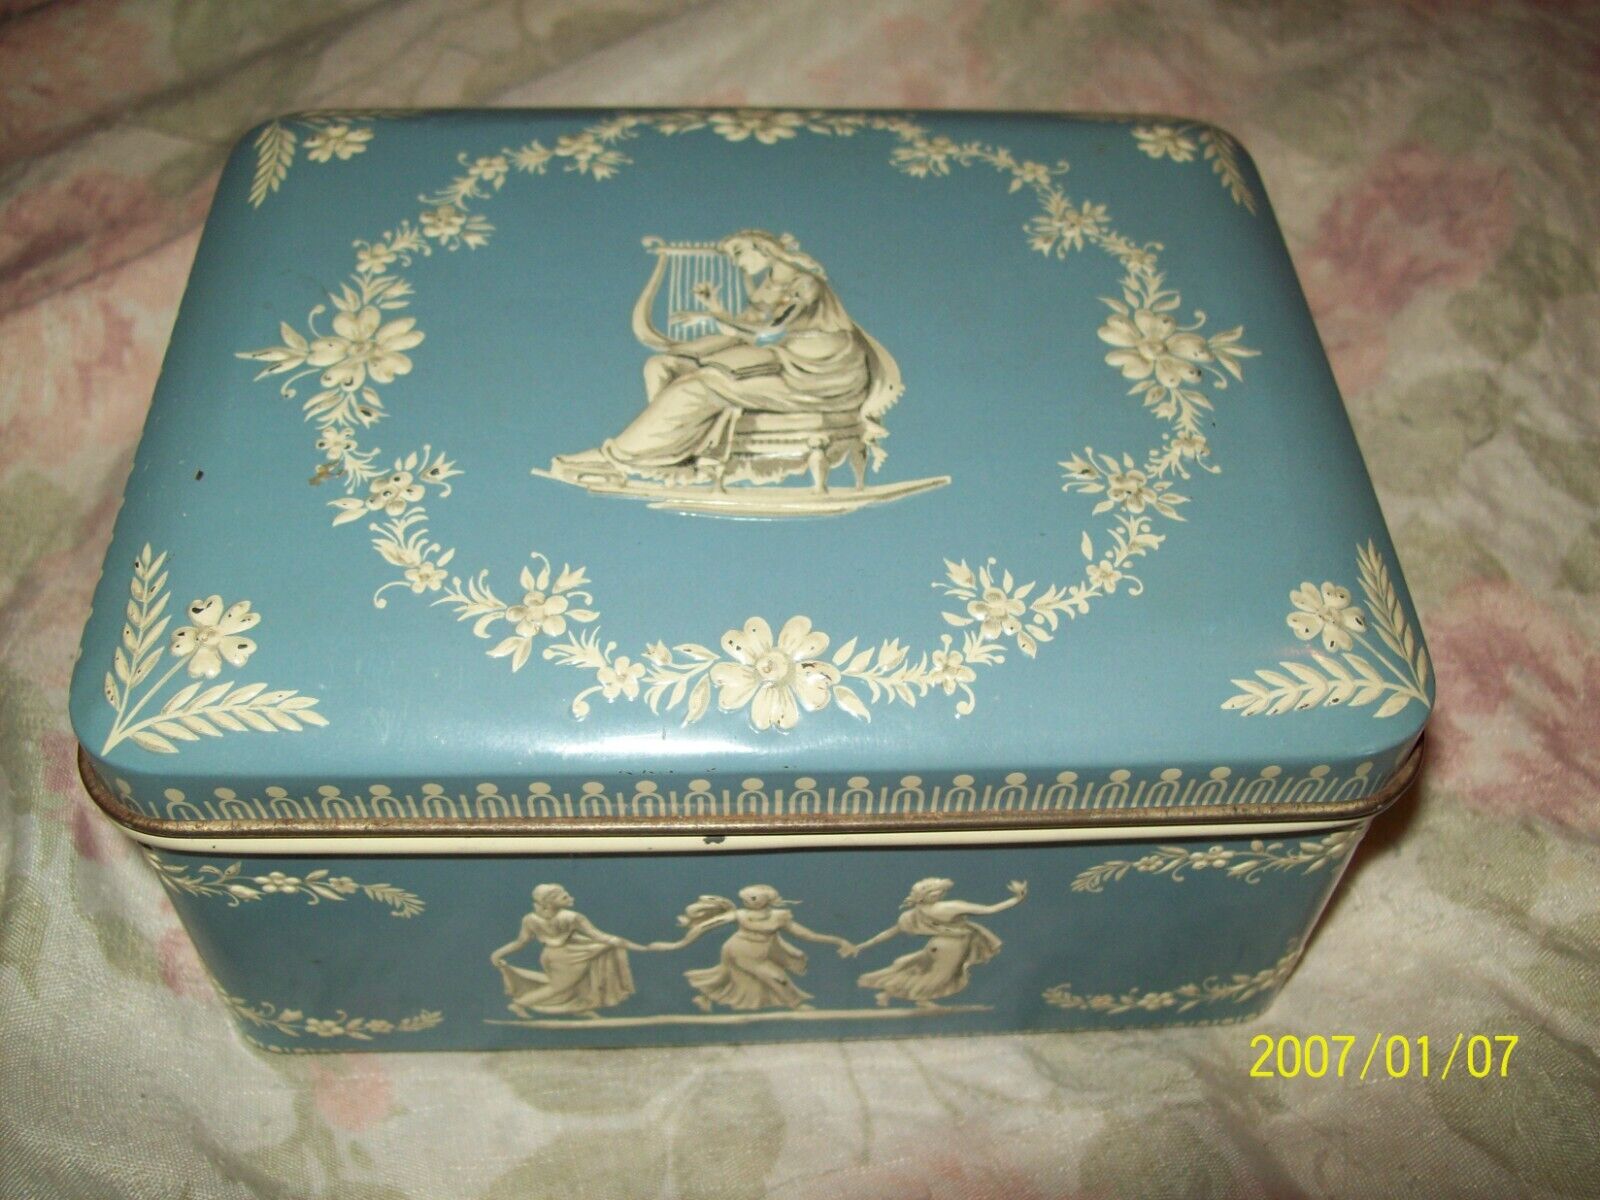 Vintage Tin Made in Holland Hinged Lid Embossed Design Blue and White